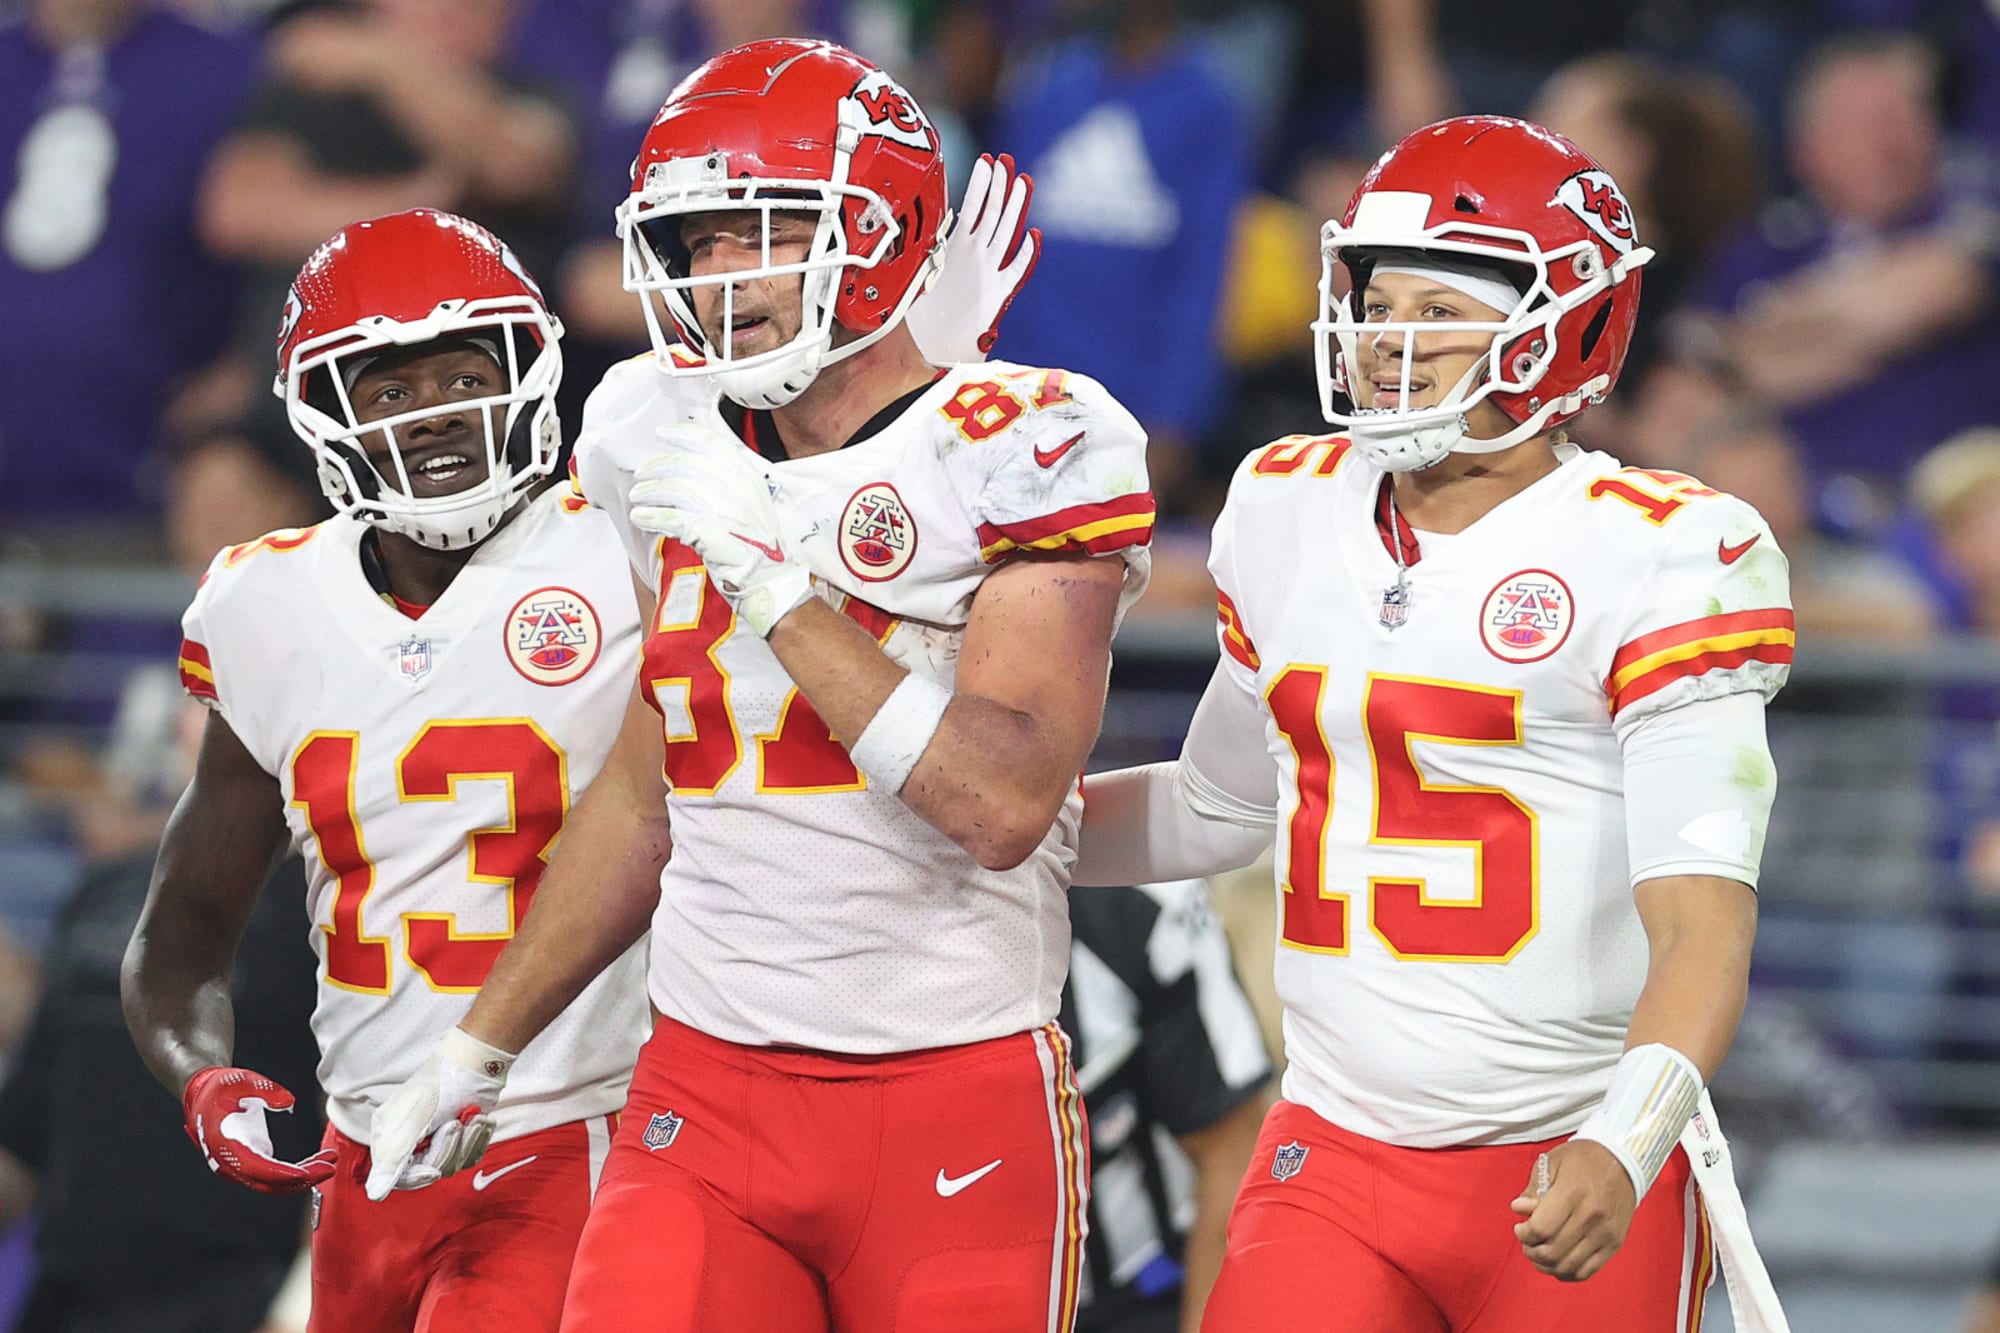 KC Chiefs featured several times on top 10 TV broadcasts of 2021